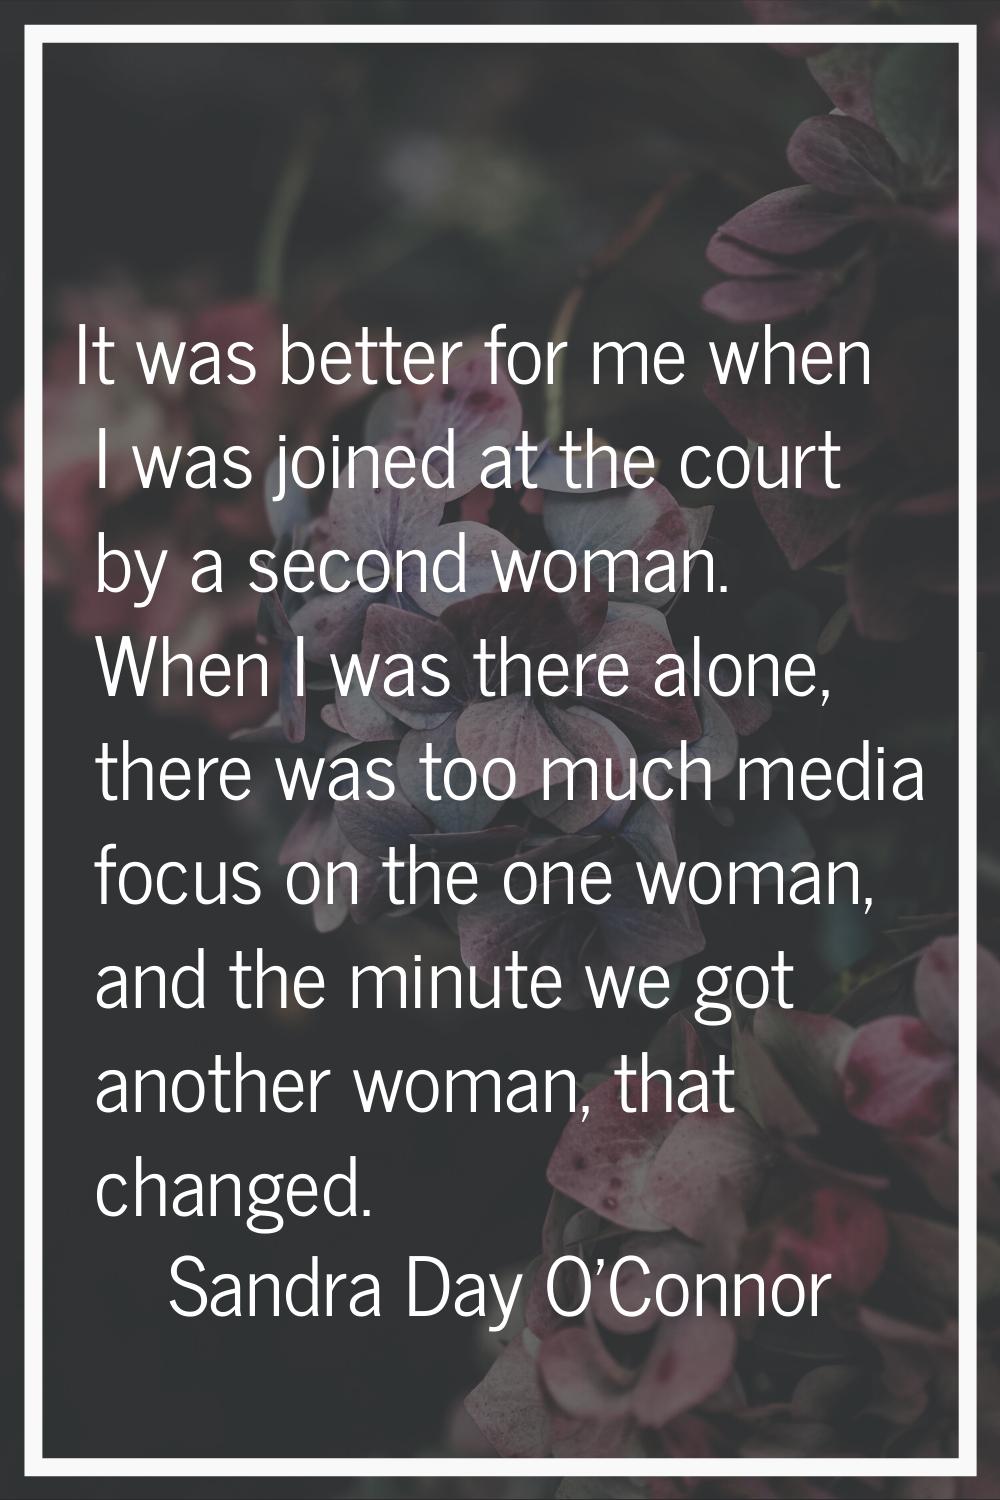 It was better for me when I was joined at the court by a second woman. When I was there alone, ther